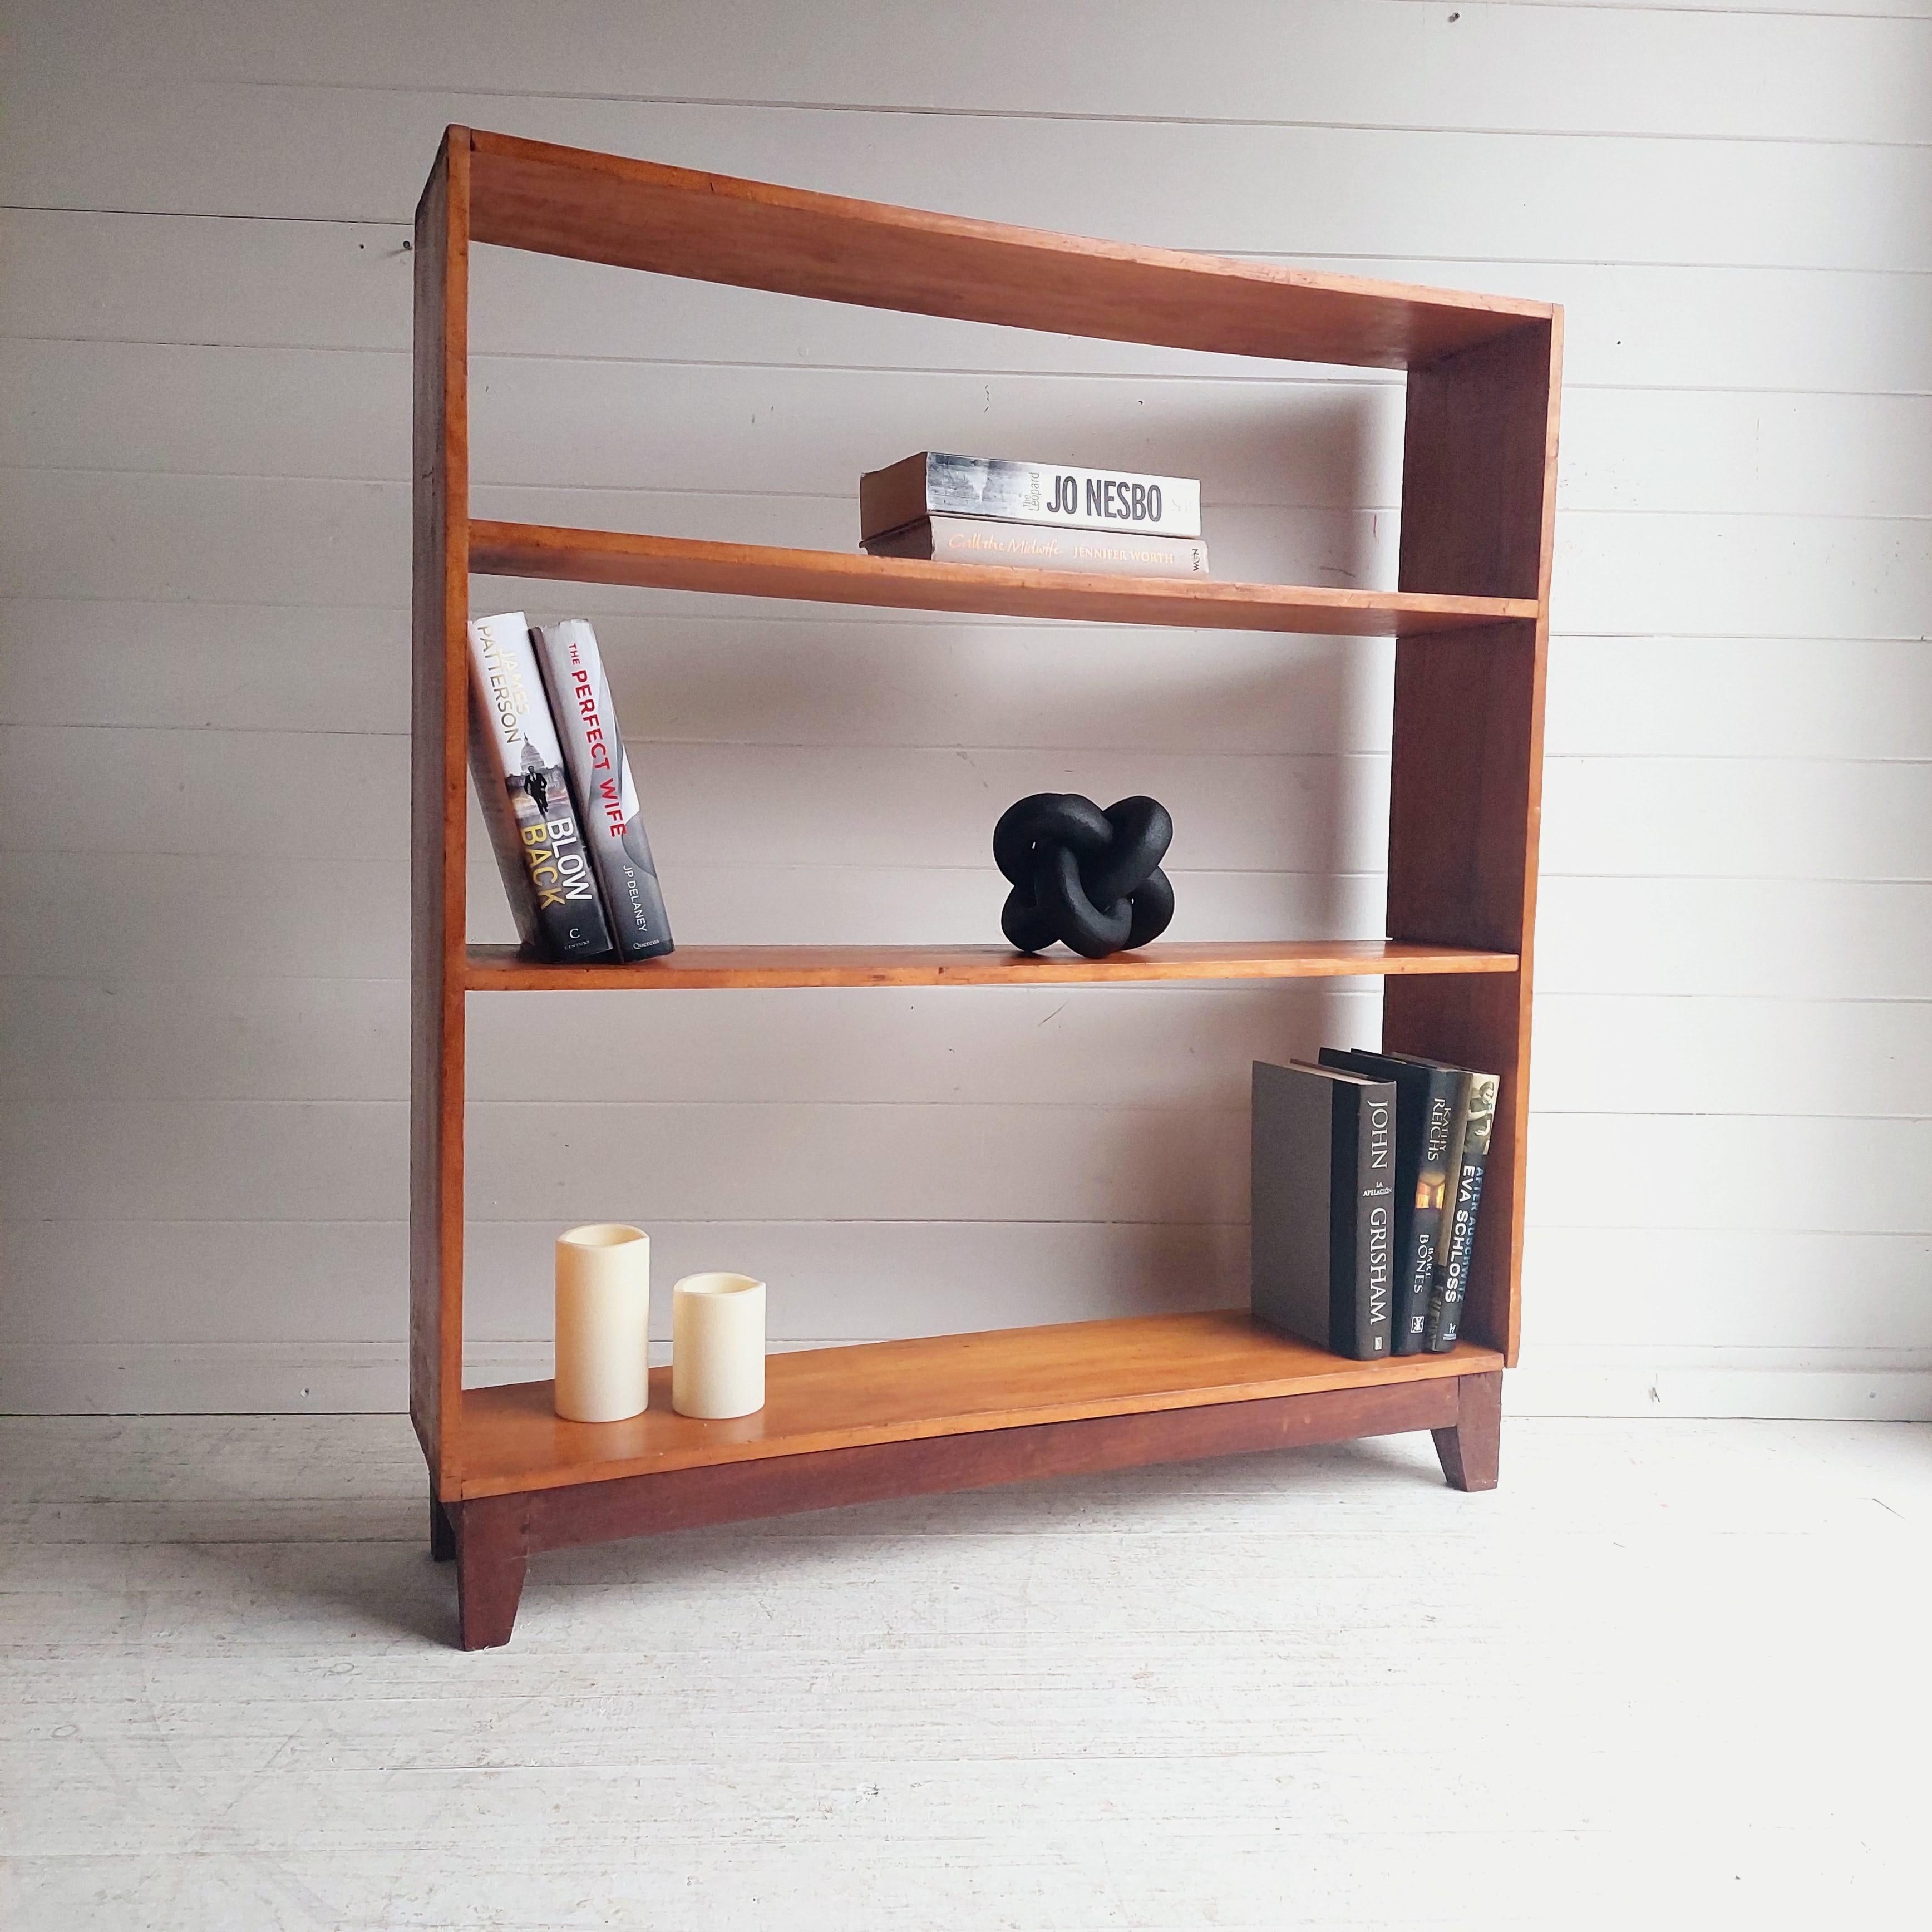 1940-50's  Teak Bookcase.
A handmade and probably unique piece.

Finished in solid teak the piece has a slightly distressed look and an aged patina. 
The design is typically Mid Century with a clean lines and visible finger joints in all 4 corners